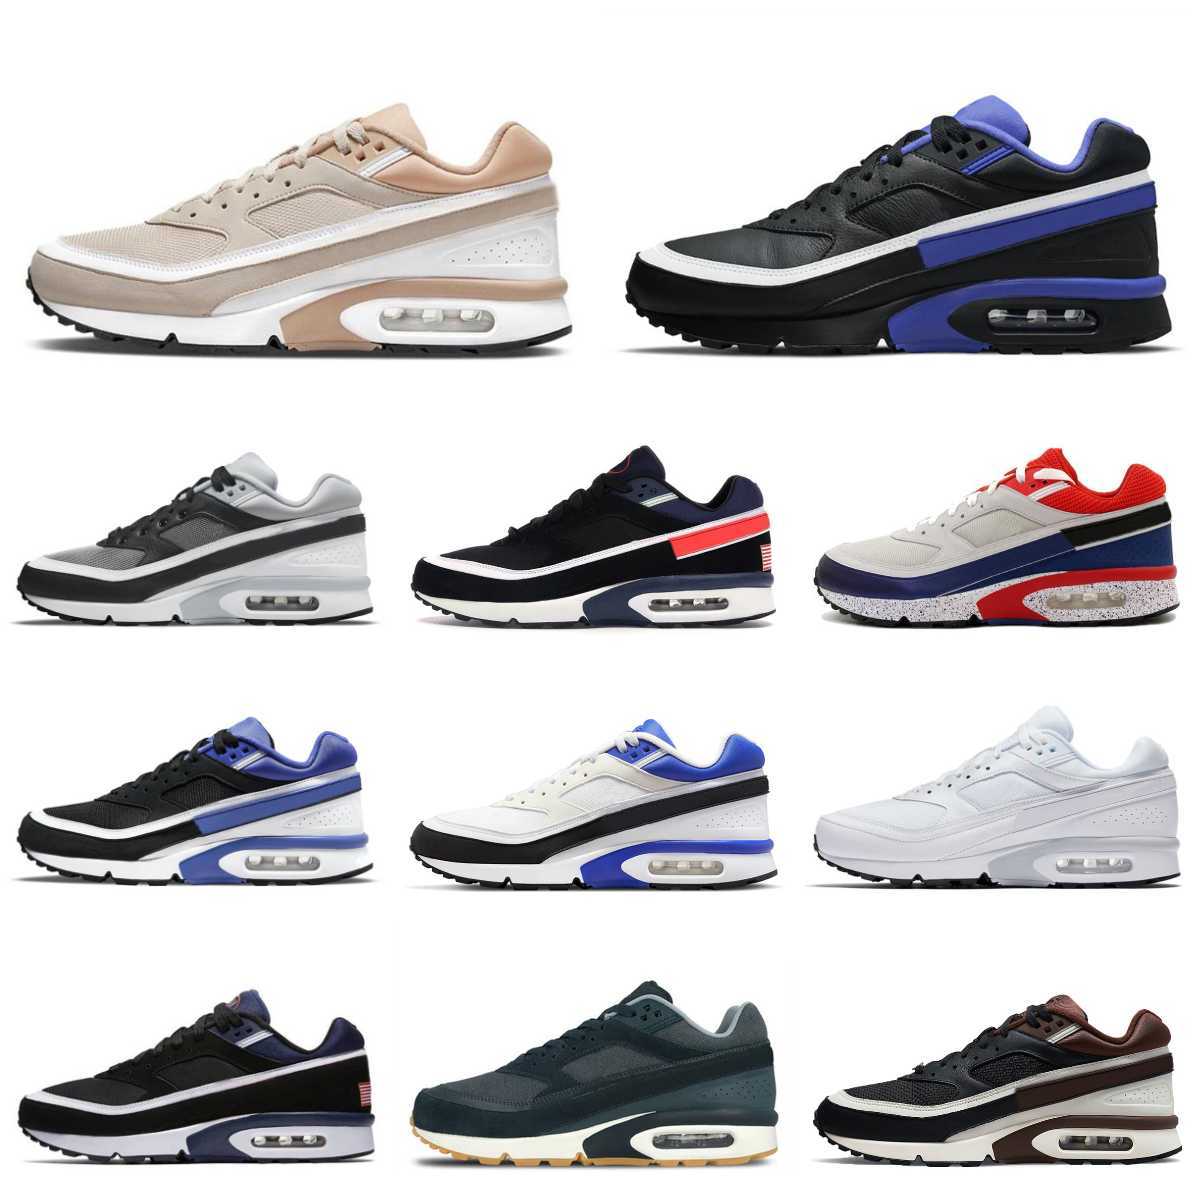 

2023 Mens Persian Violet Bw Sports Shoes Stone Milk Jade Airs Rotterdam Lyon Airmaxs Reverse White Sport Red Trainers Women Marina Light Designer Jogging Sneakers S9, Please contact us